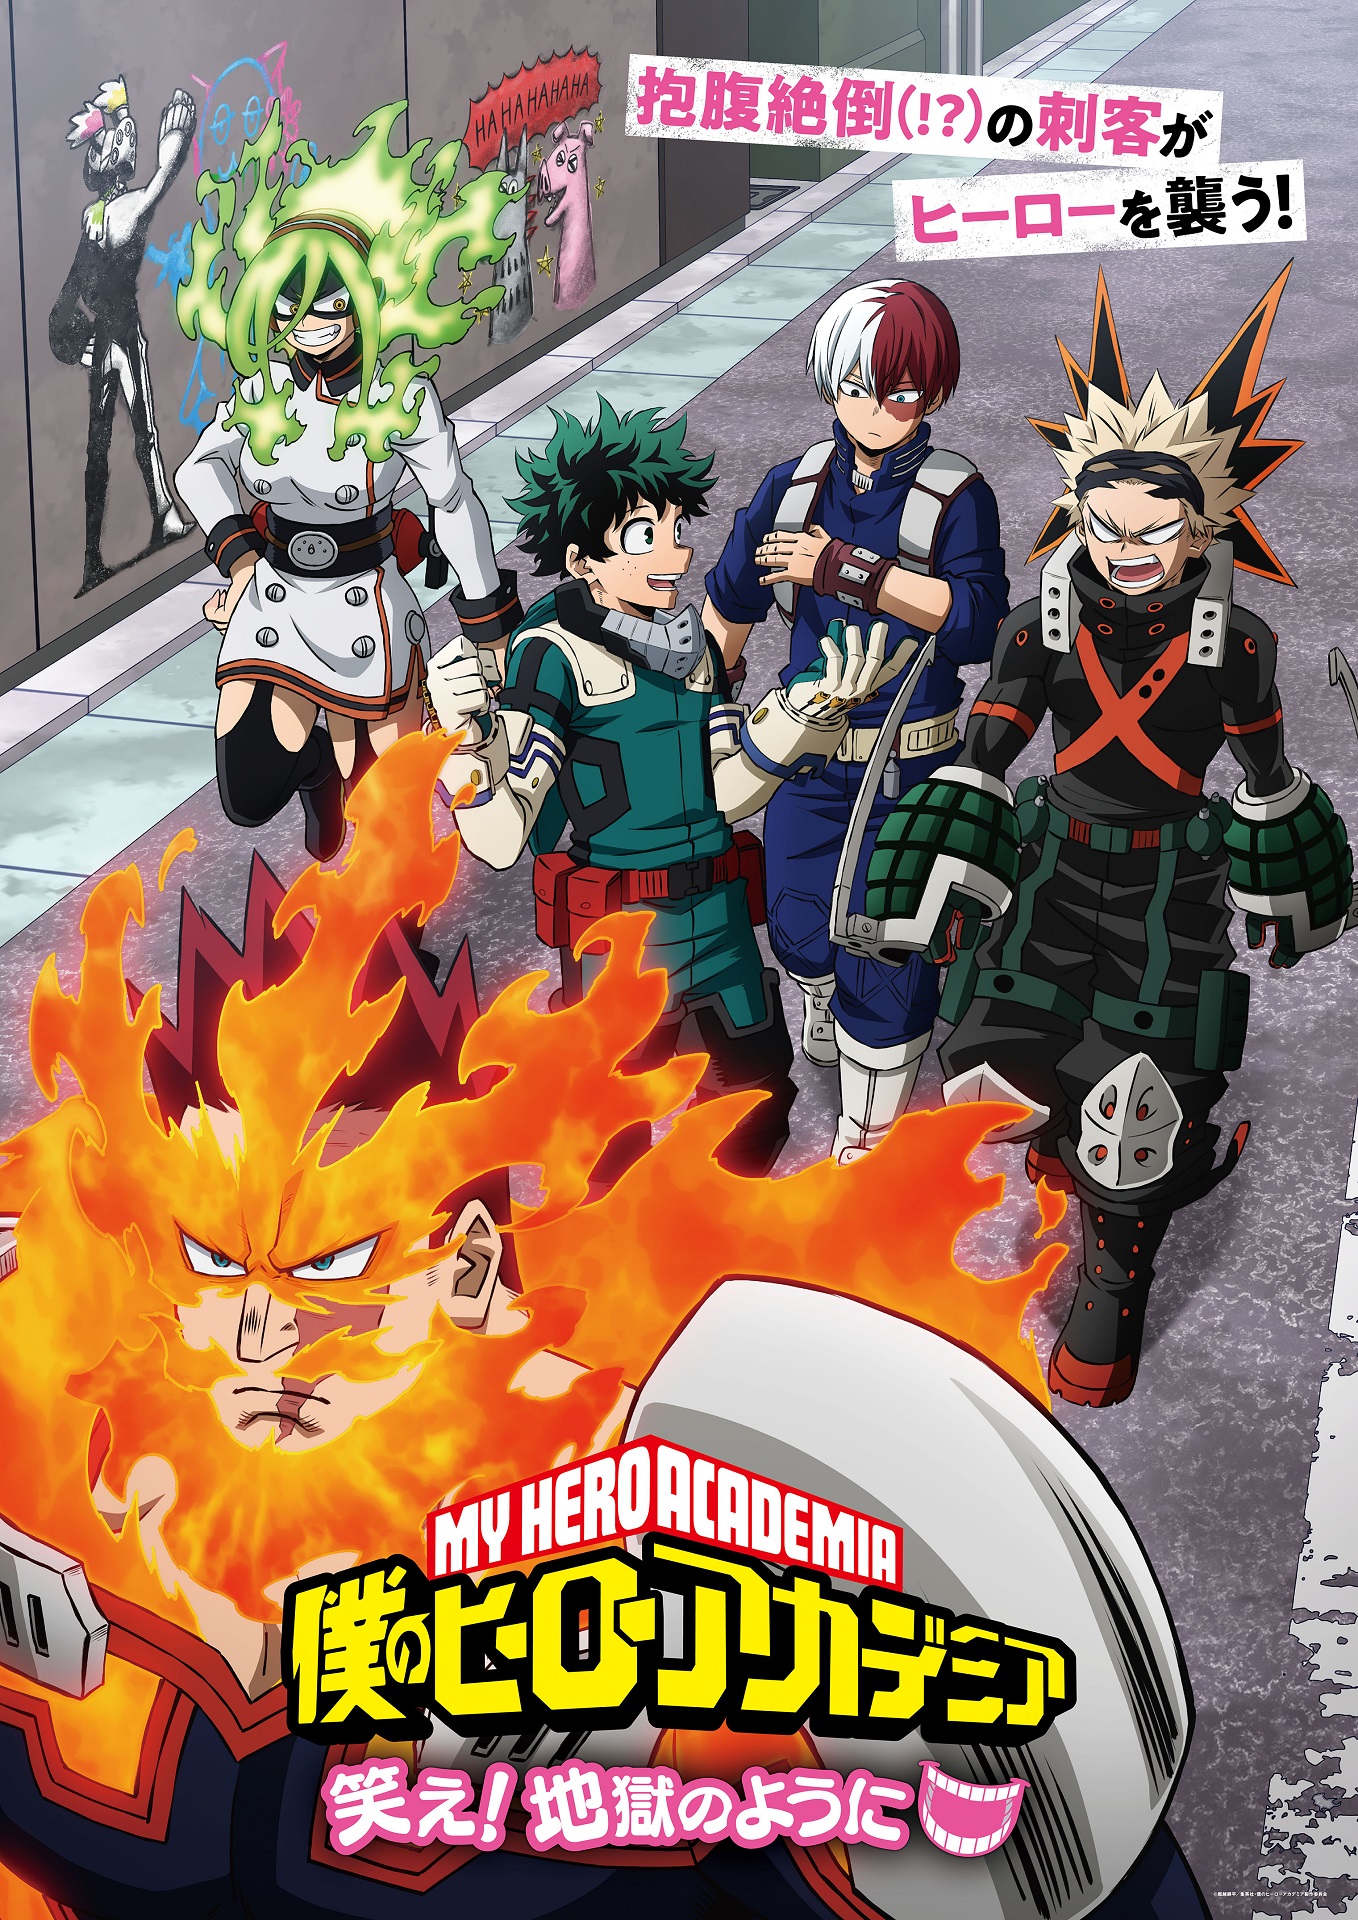 My Hero Academia Live-Action Play Reveals Home Video Details